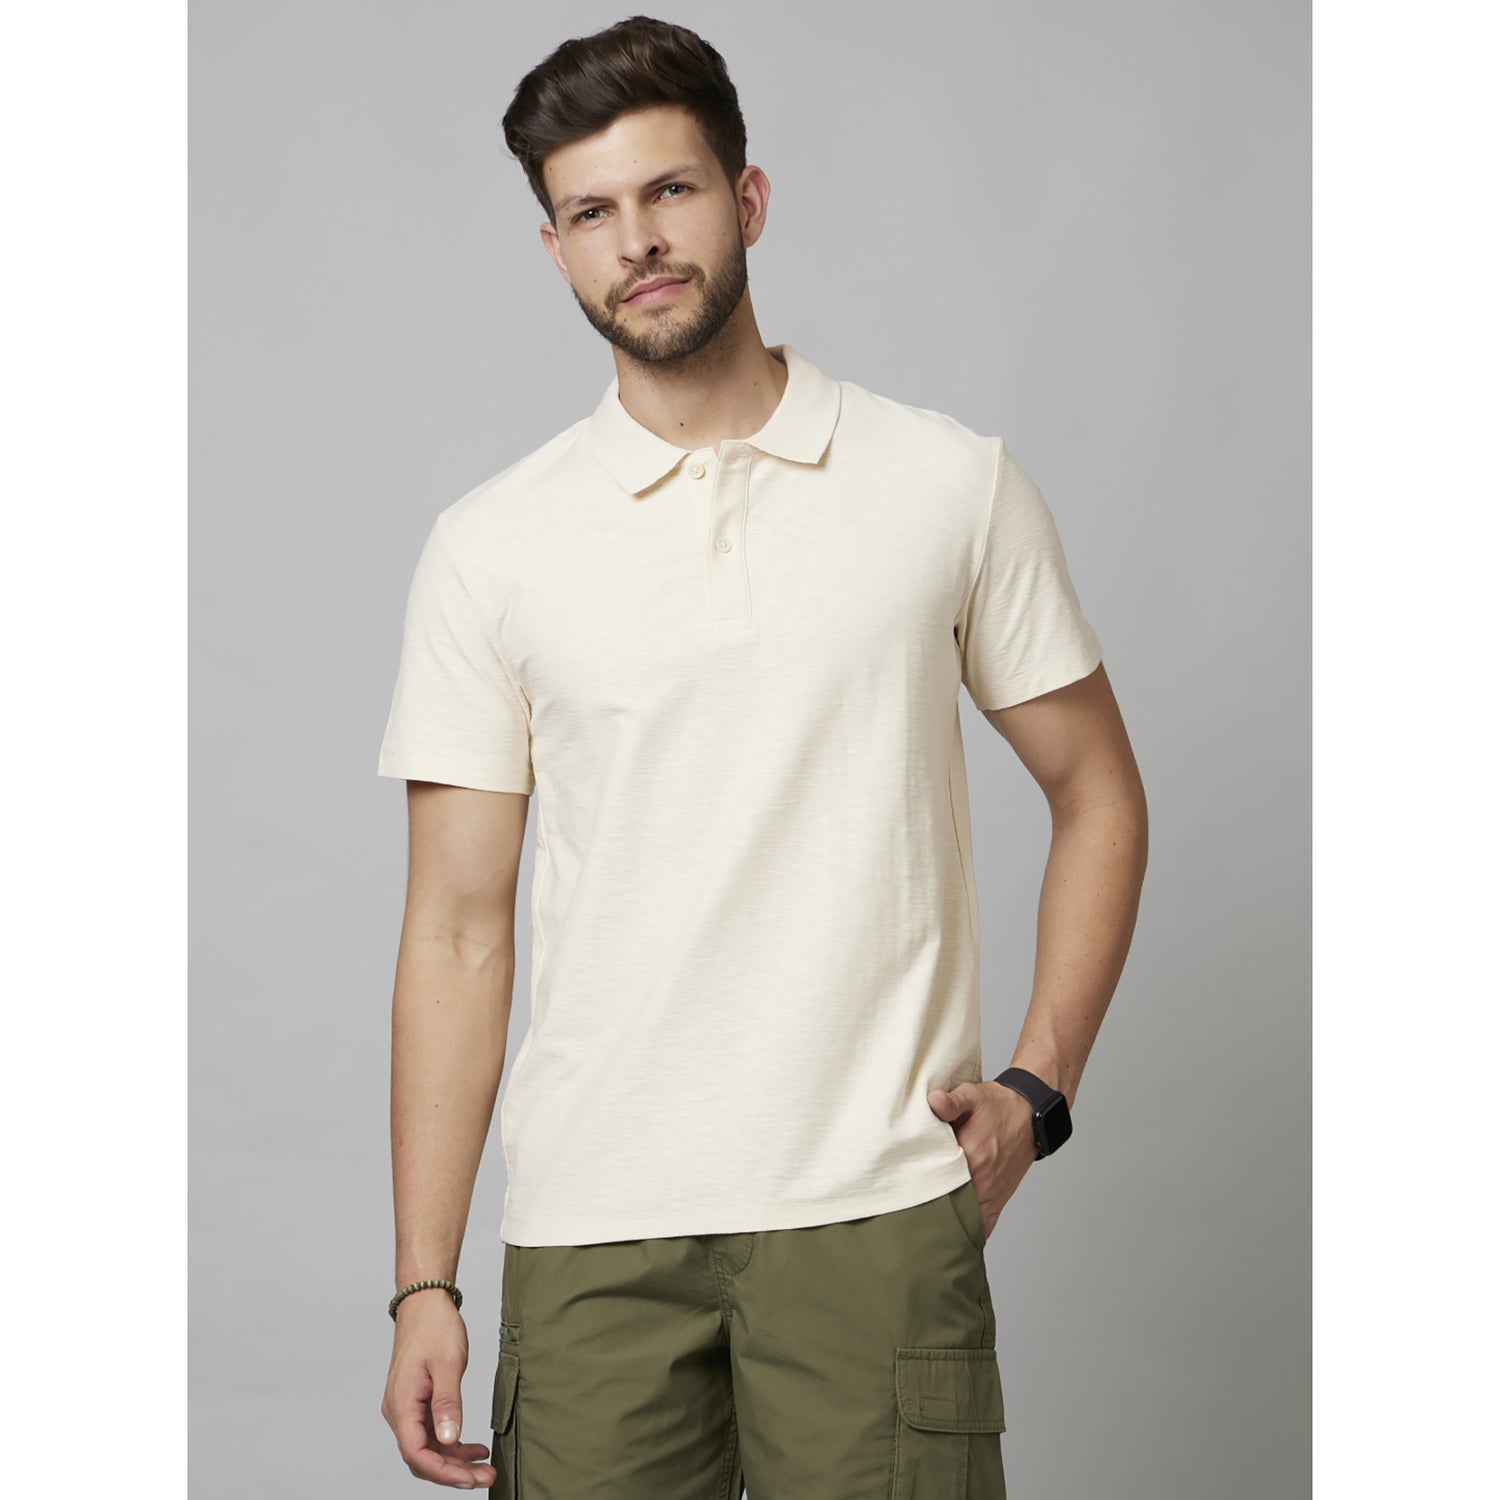 Beige Solid Short Sleeve Cotton T-Shirts (FEFLAME)